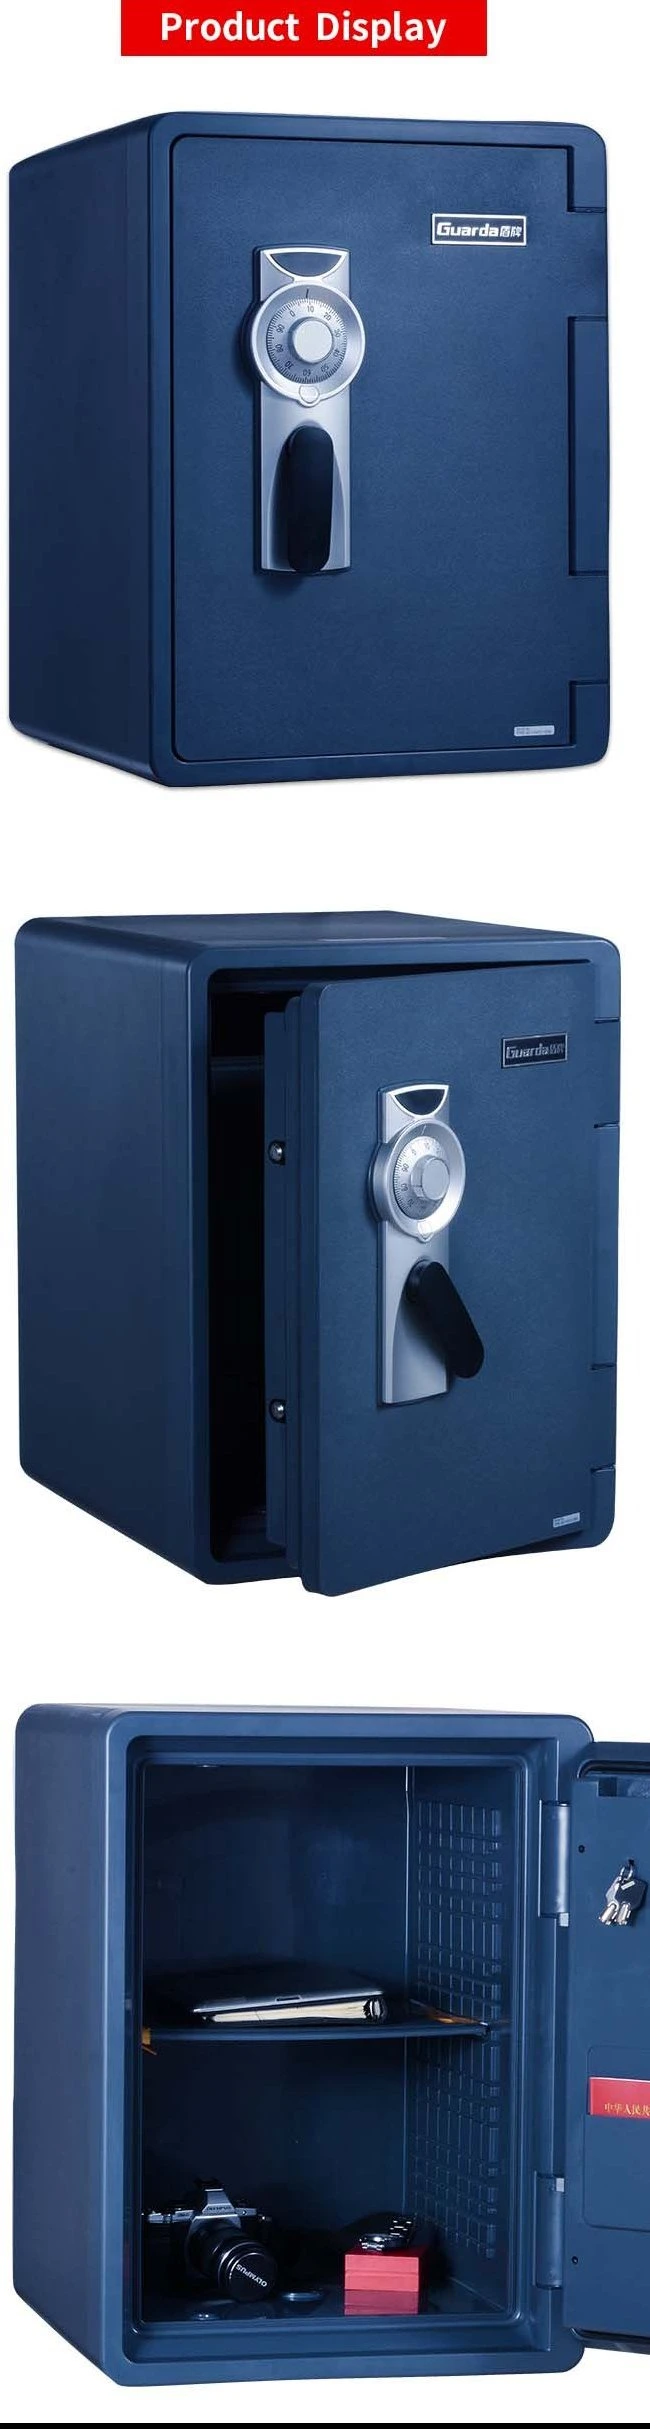 The Best 2021 Sentry Type Fireproof Secret Hidden Document Valuable Safe with Combination Dial Lock 2096wc